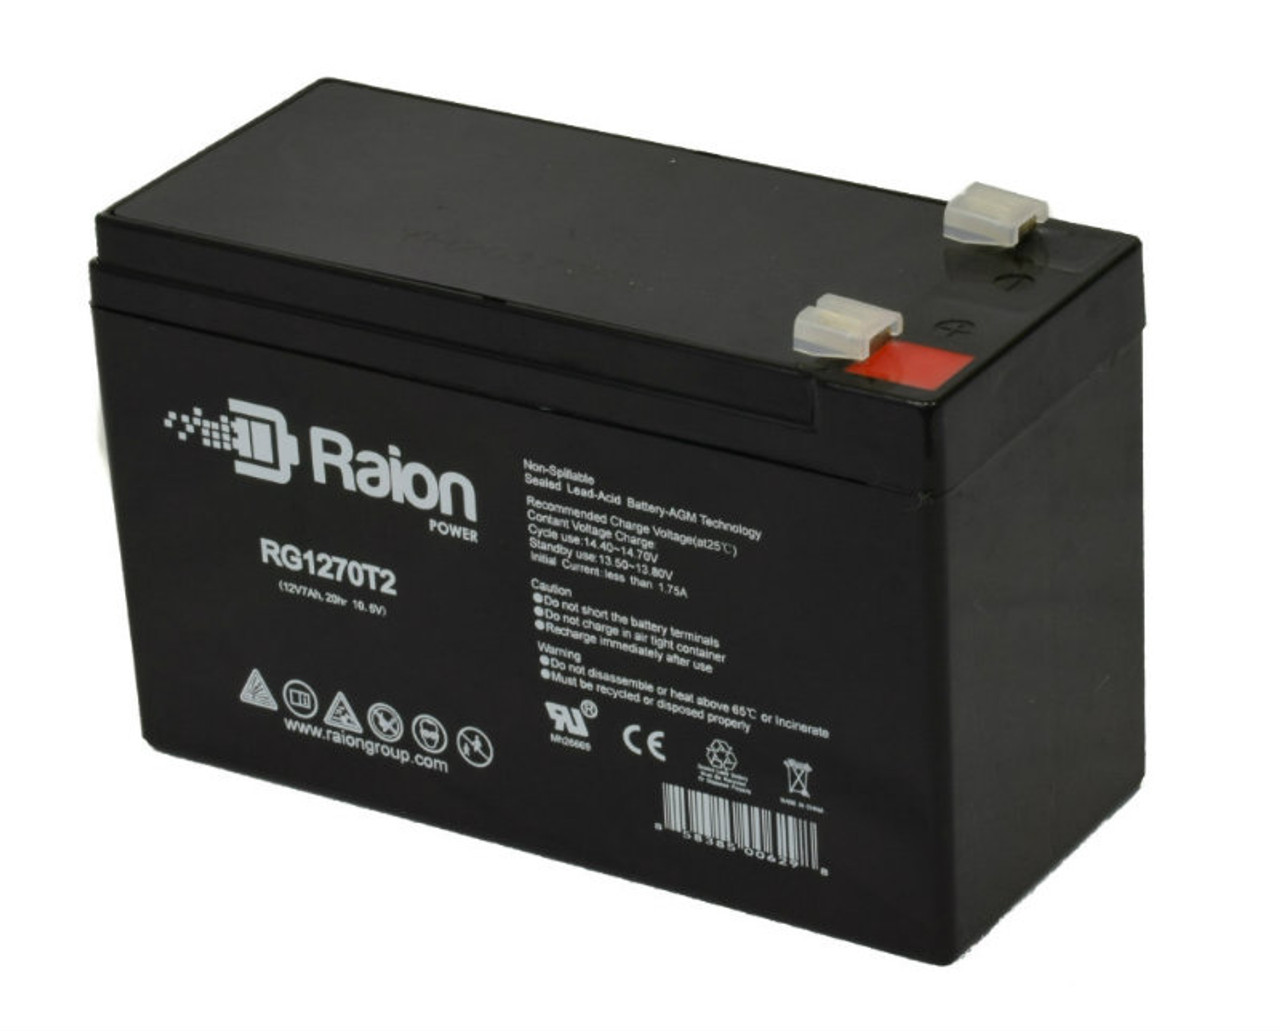 Raion Power RG1270T1 12V 7Ah Non-Spillable Replacement Battery for NERBO NB 7-12